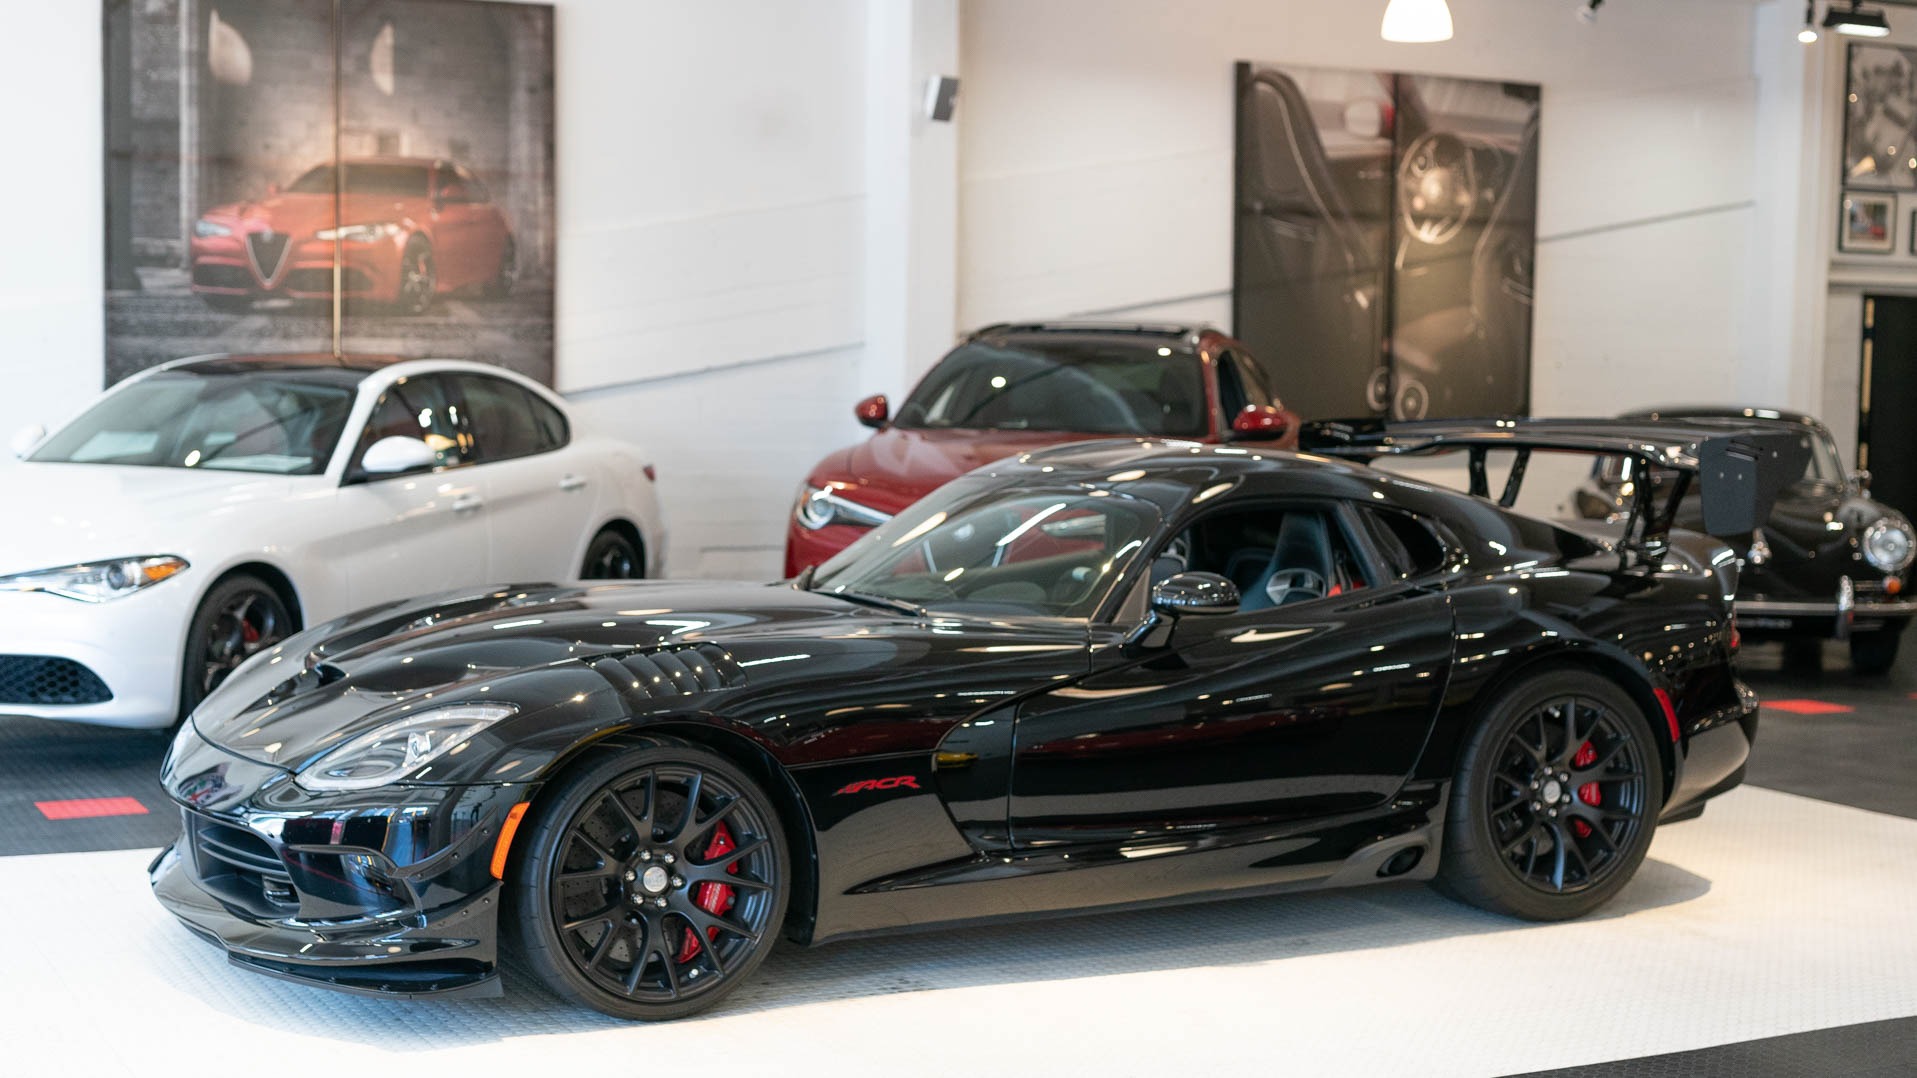 Used 2017 Dodge Viper Acr For Sale 139 900 Cars